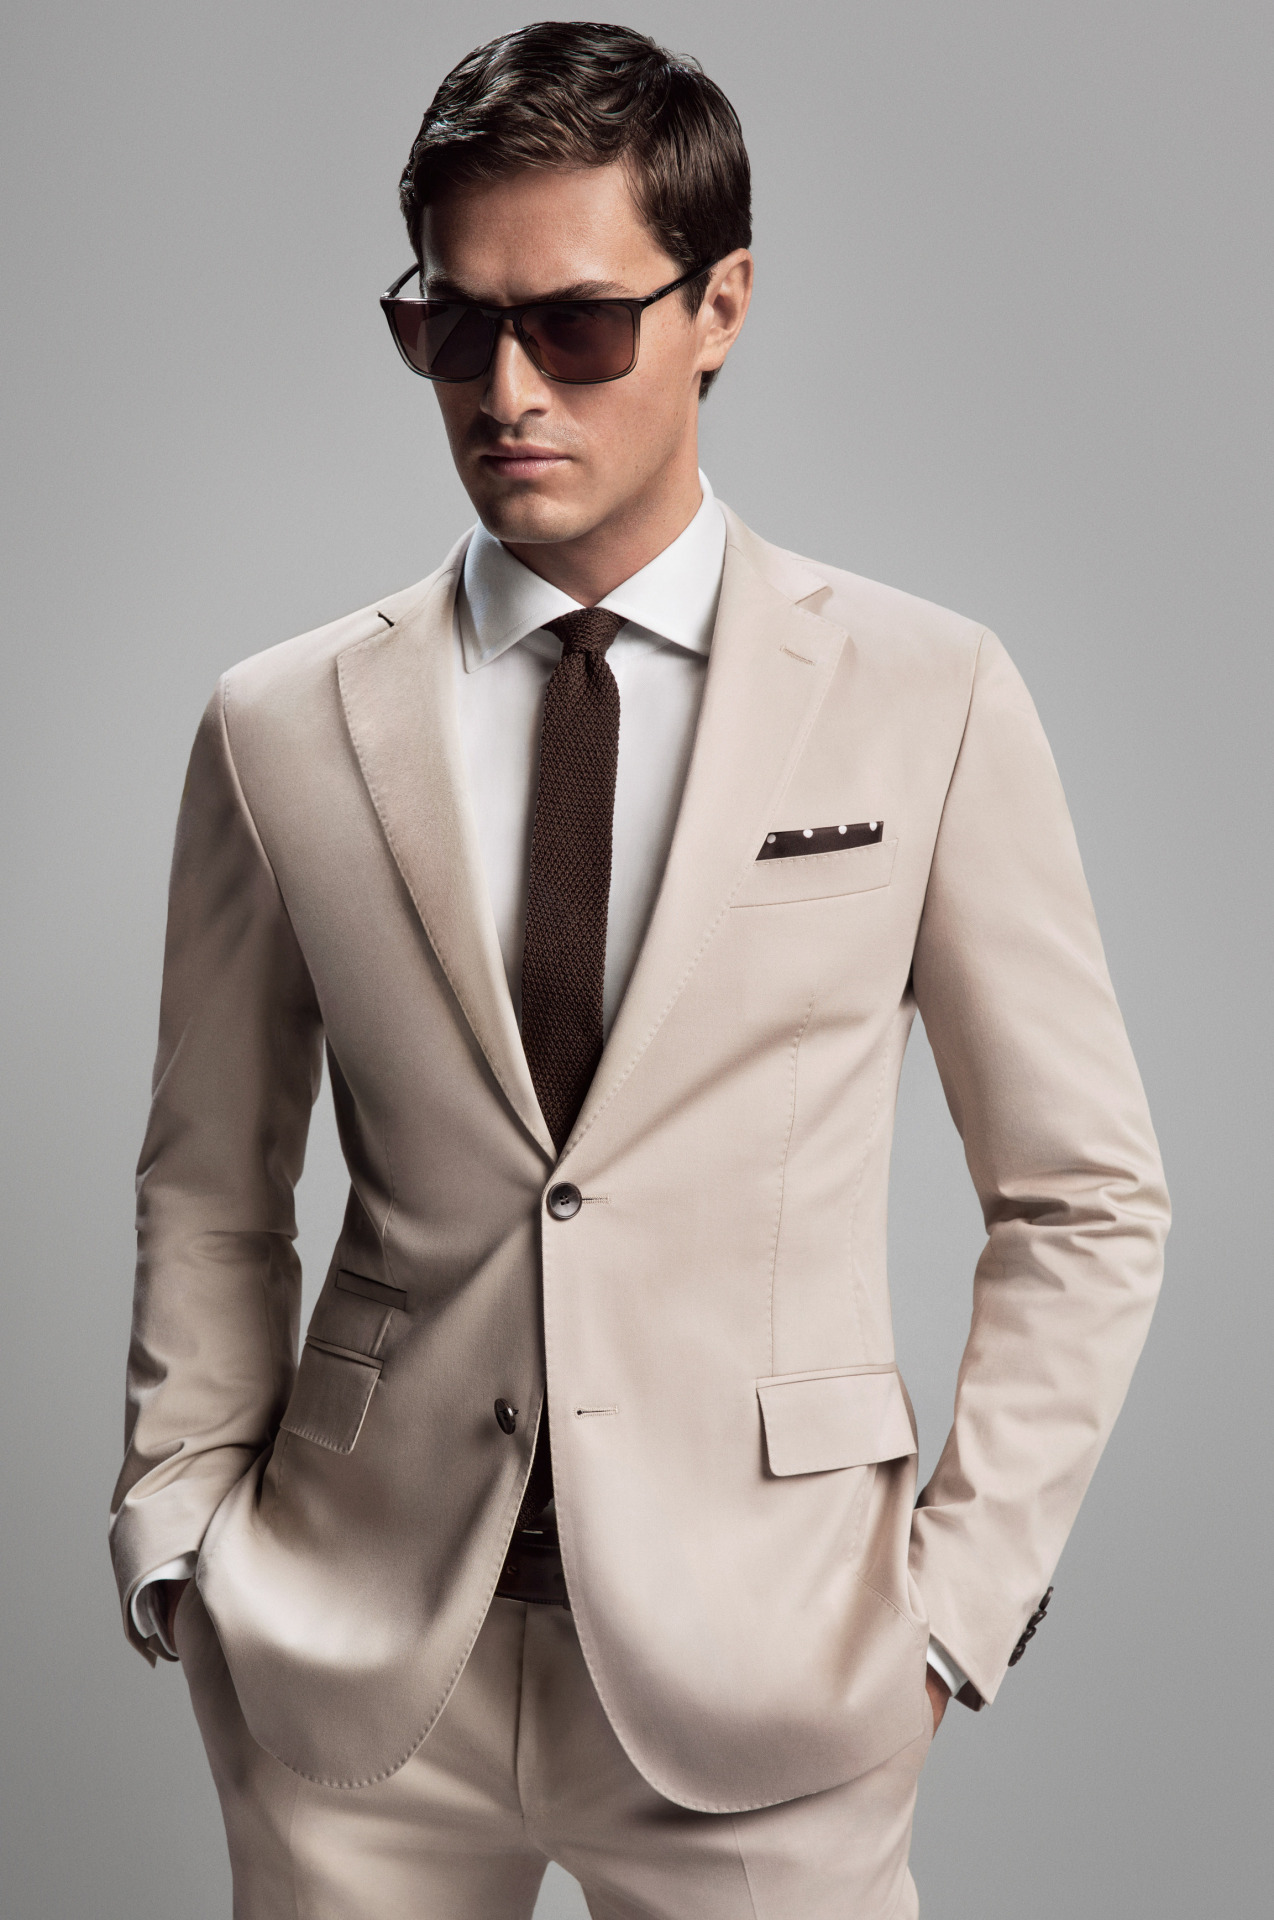 Prelude to Reality — Hugo Boss Spring Suit